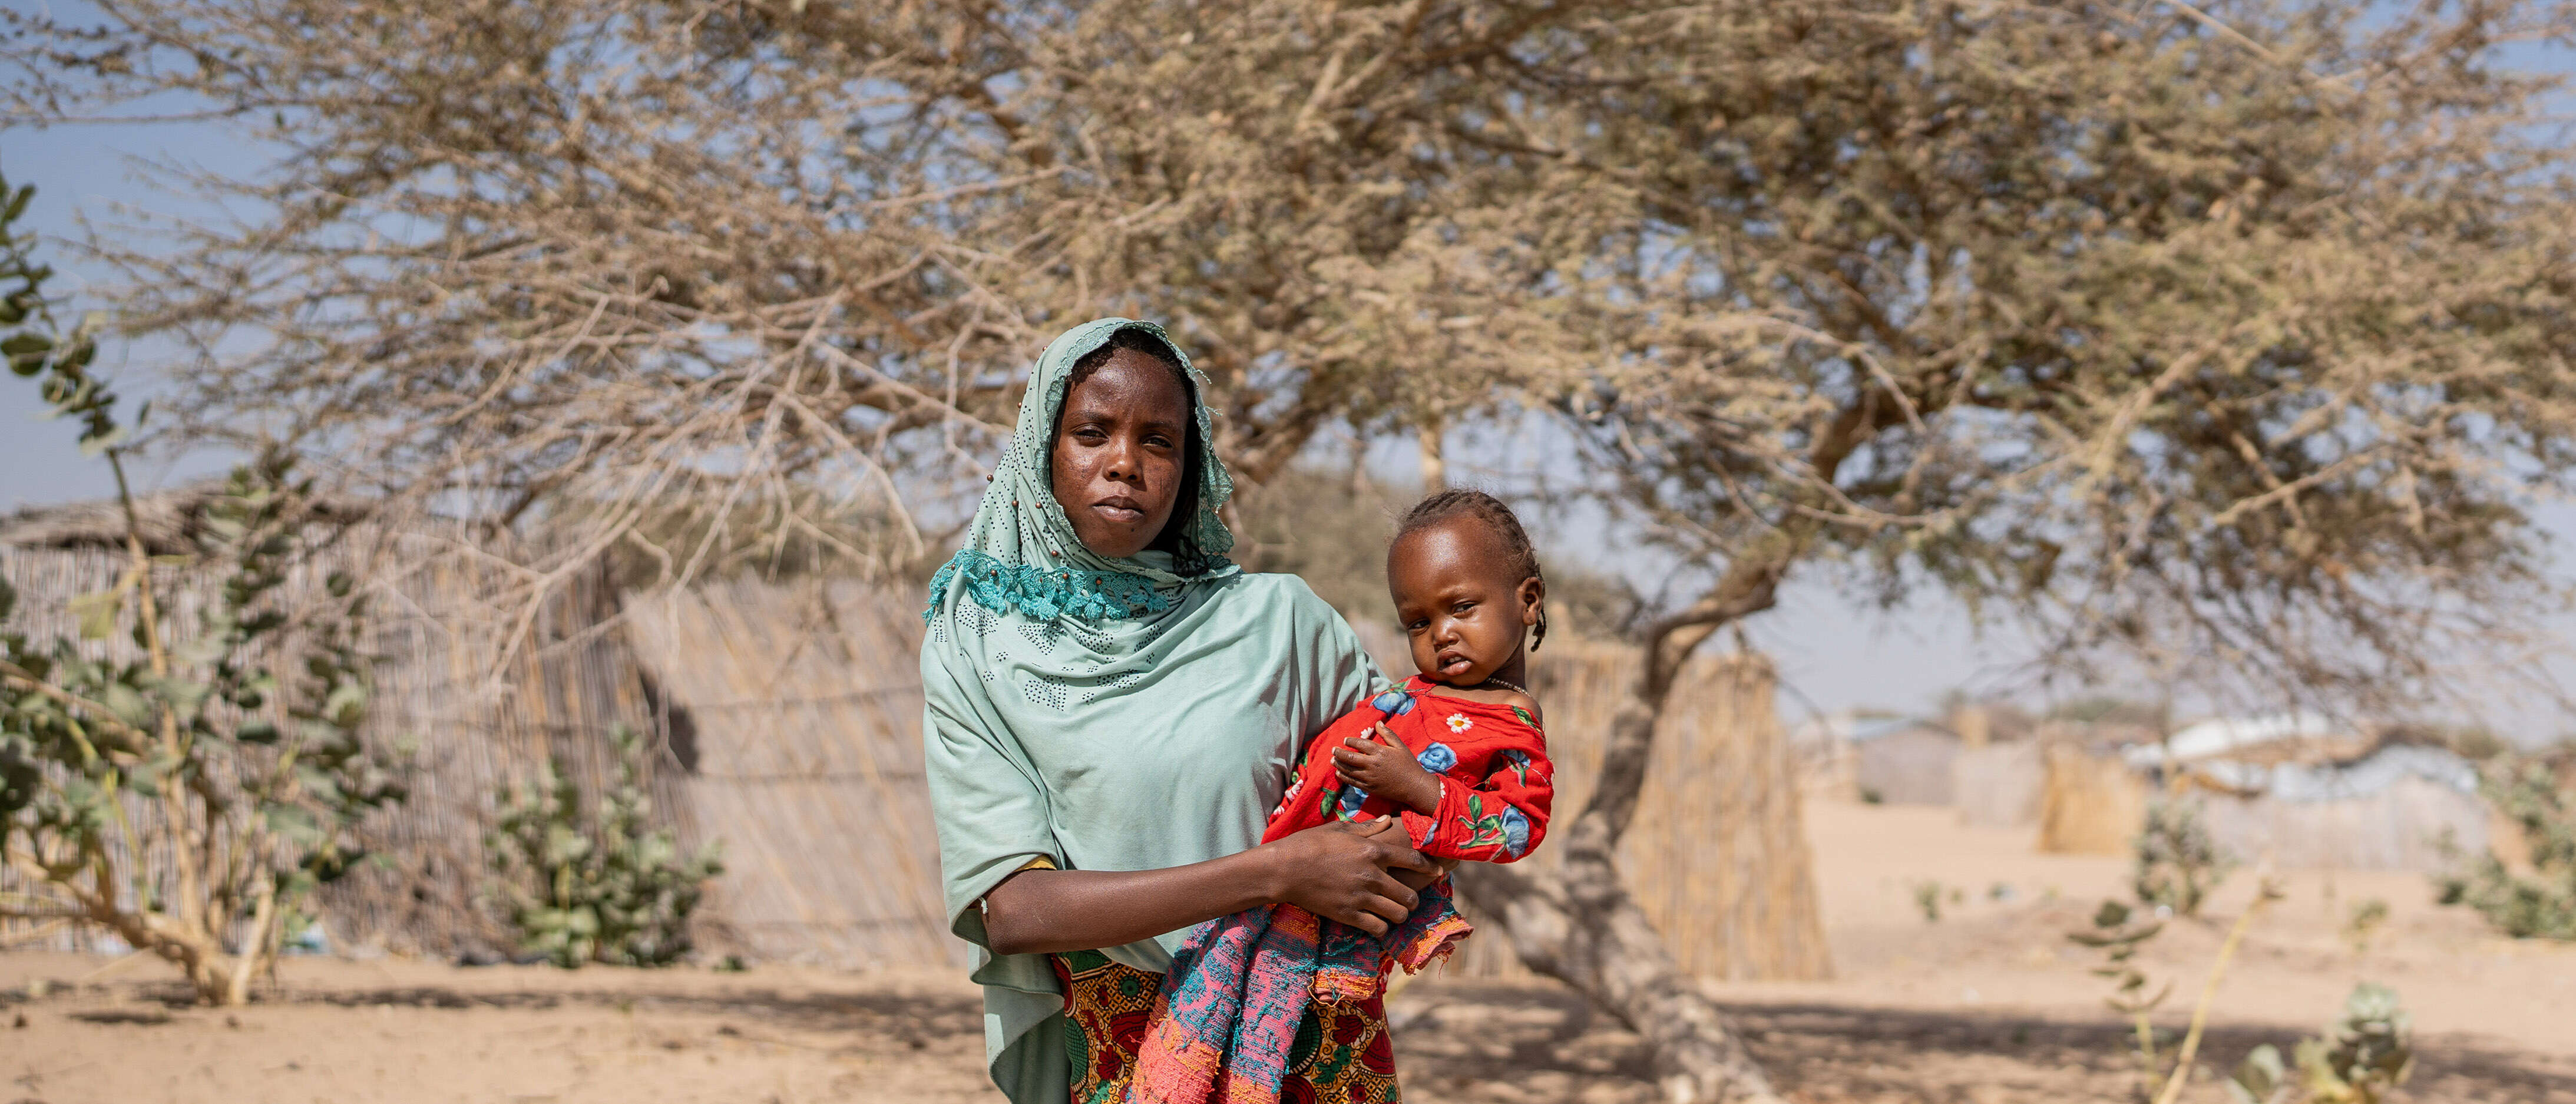 A mother and child in Chad